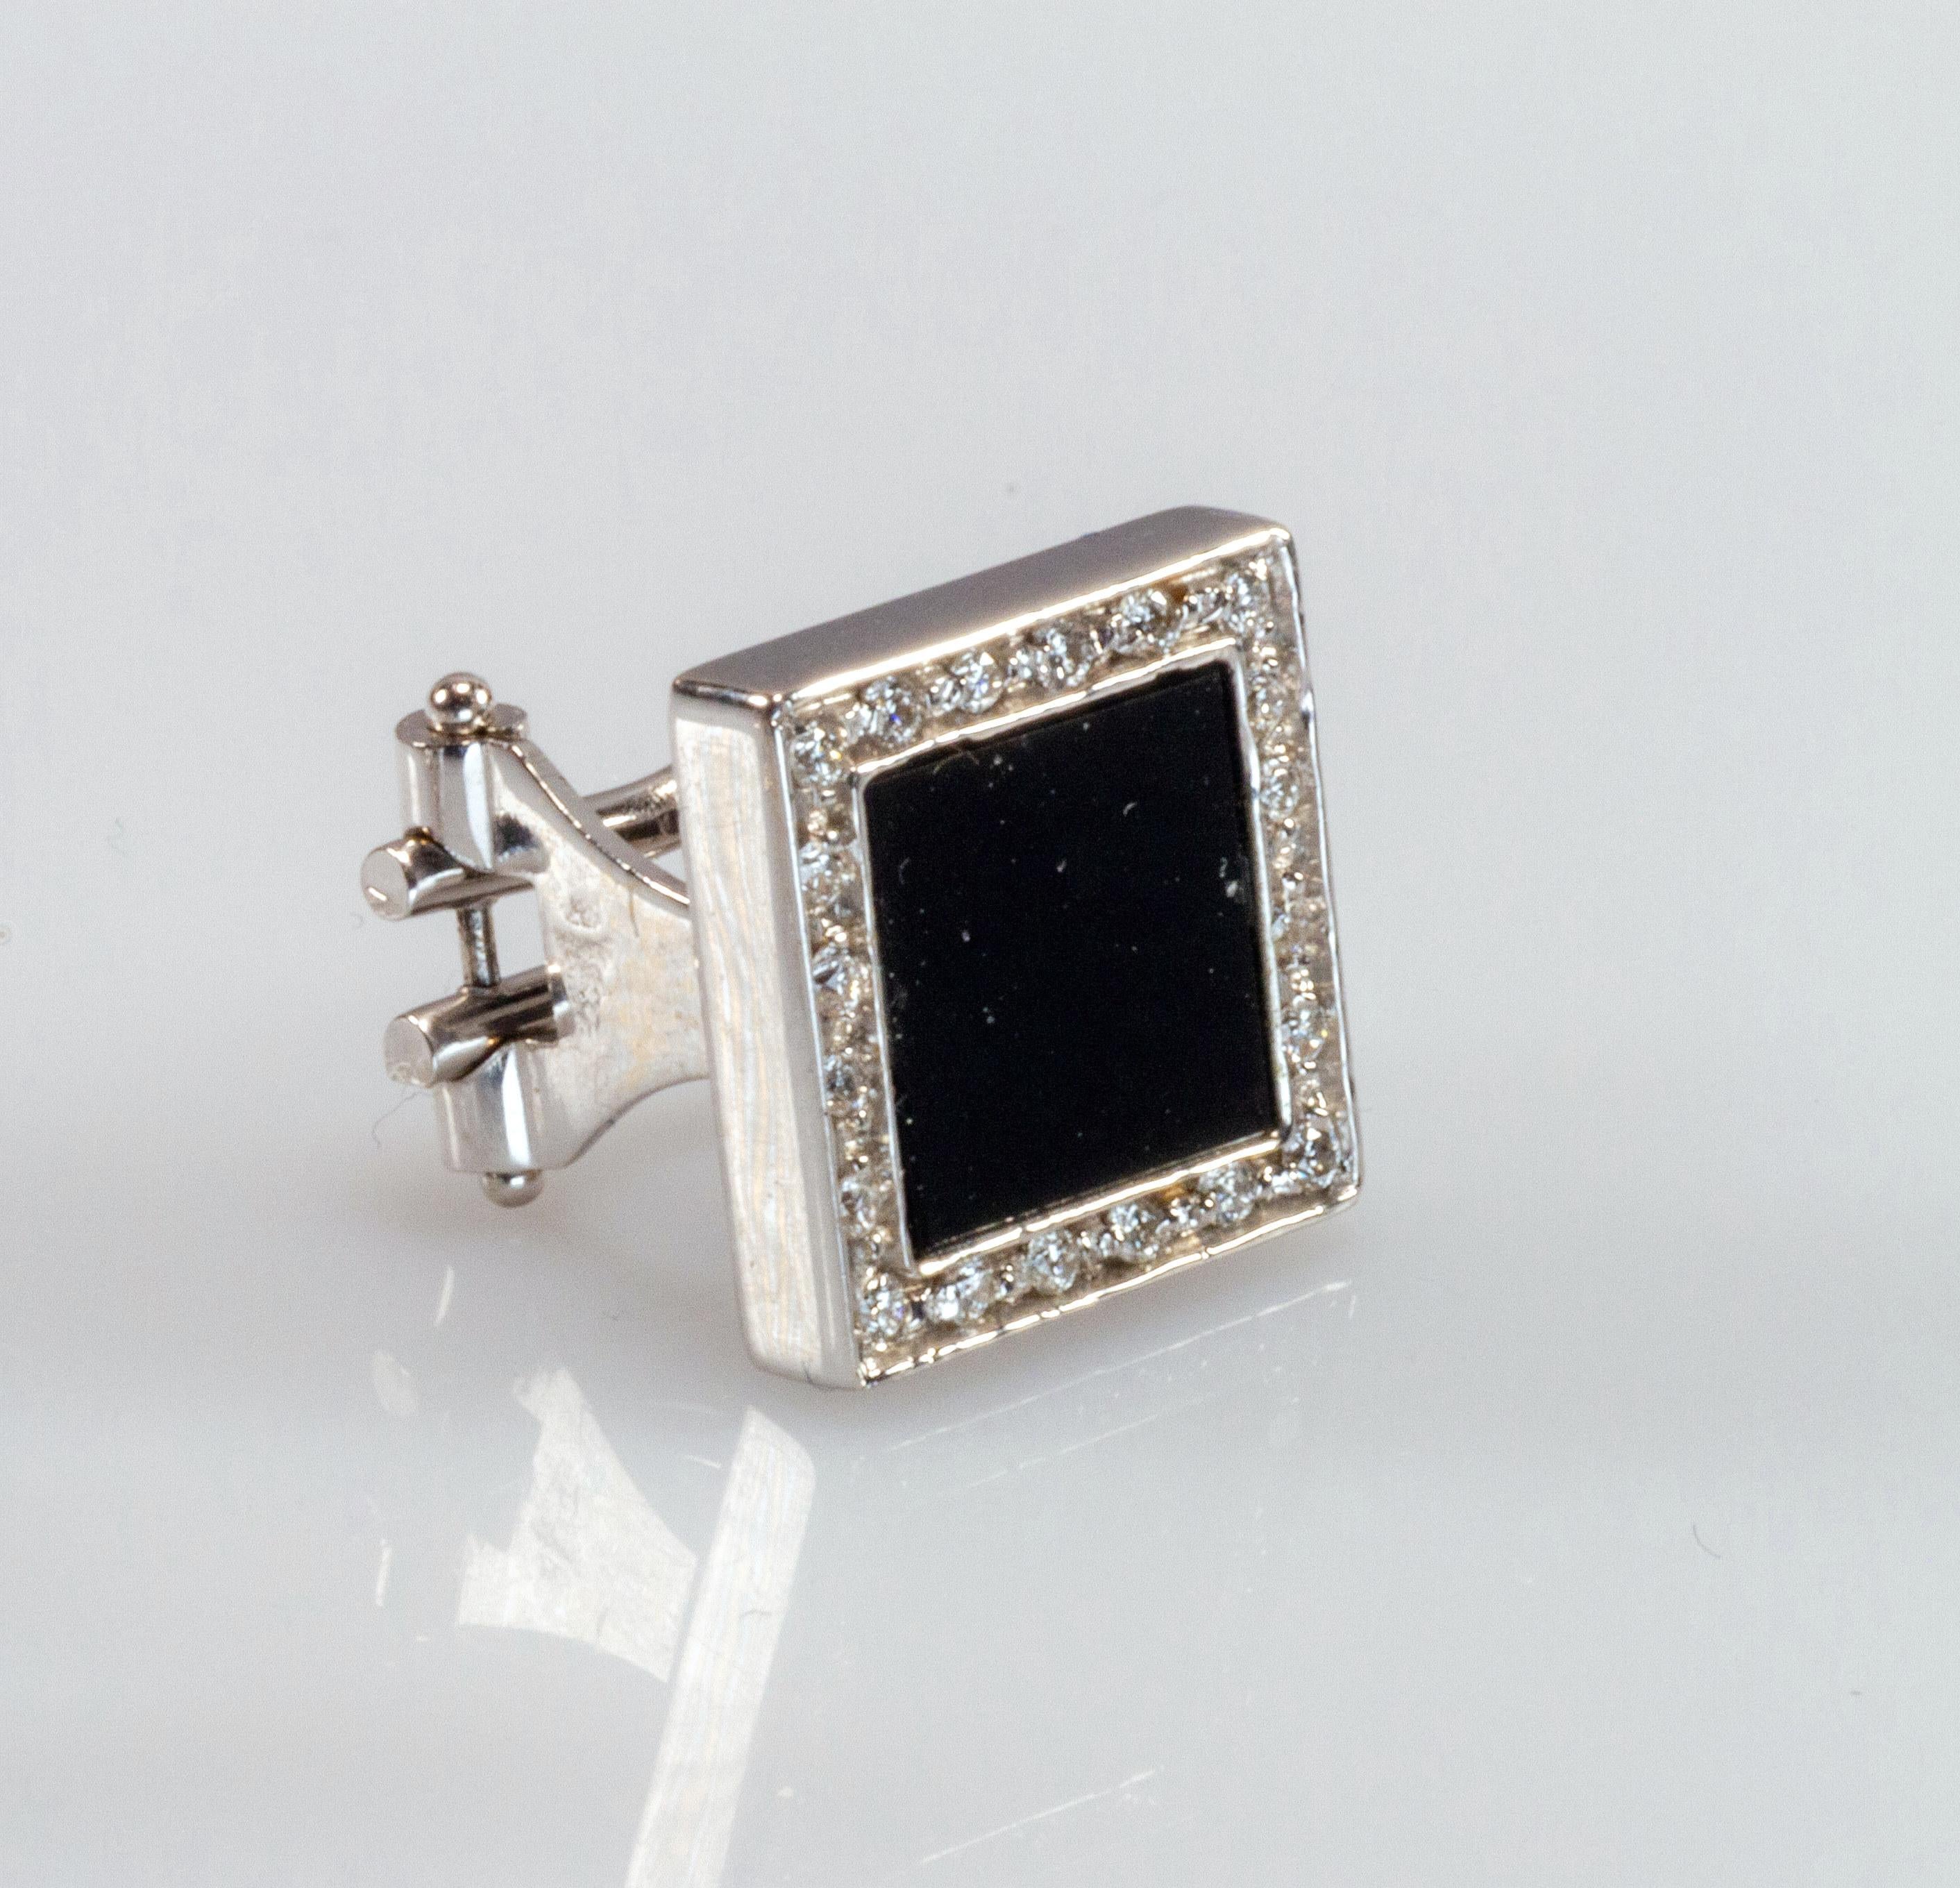 Elegant square earrings in 18-carat white gold with black onyx surrounded by diamonds.
These earrings are handmade by an Italian craftsman.
They contain:
- 2 square blocks of black onyx, dimensions 9x9 mm
- 40 natural brilliant cut diamonds, color G